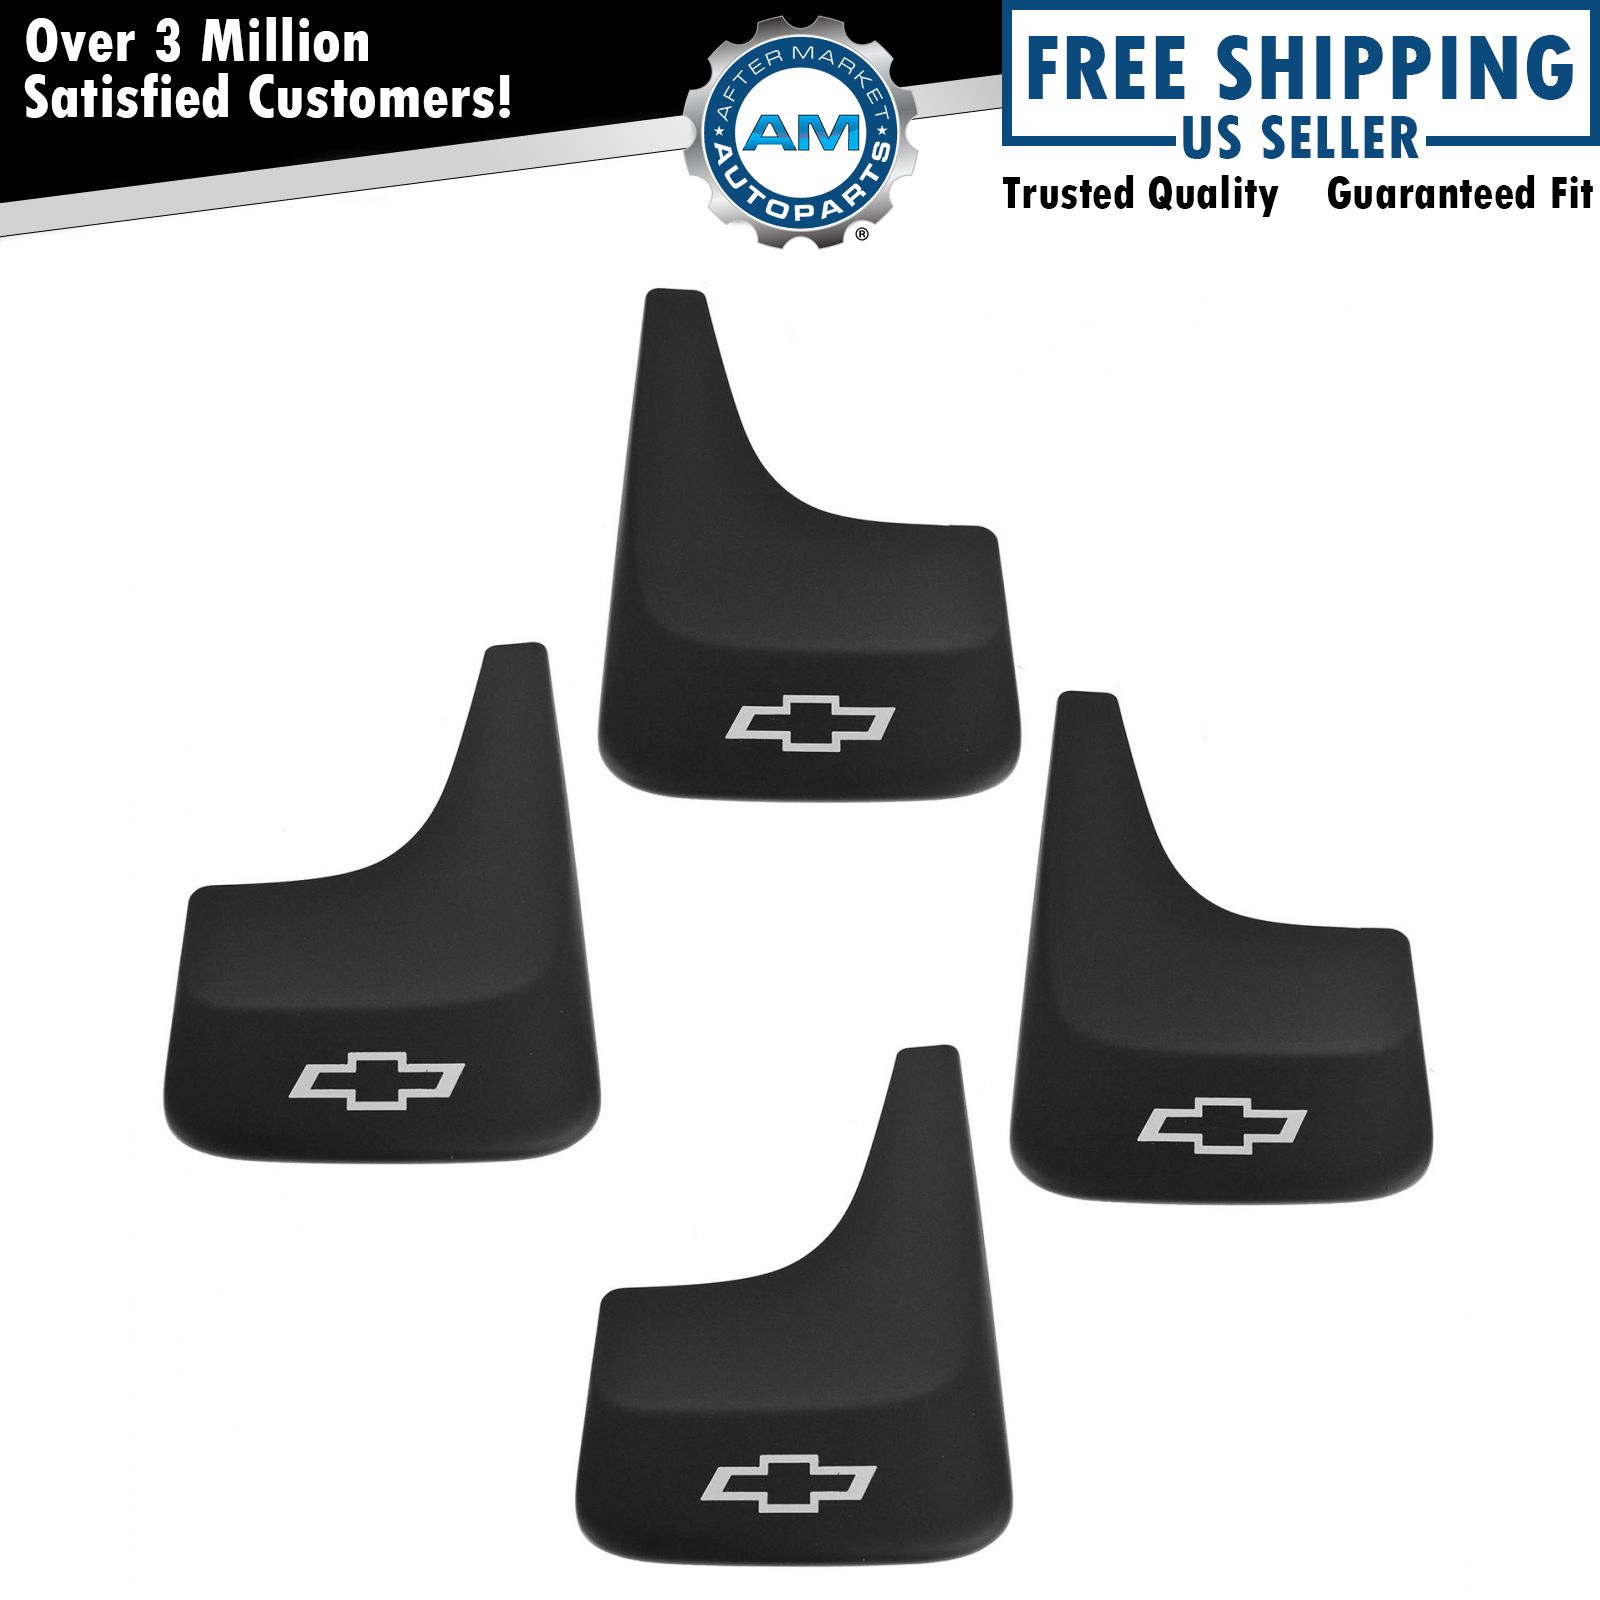 GM Mud Flap Splash Guard Front & Rear Kit Set of 4 for Chevy Pickup Truck SUV